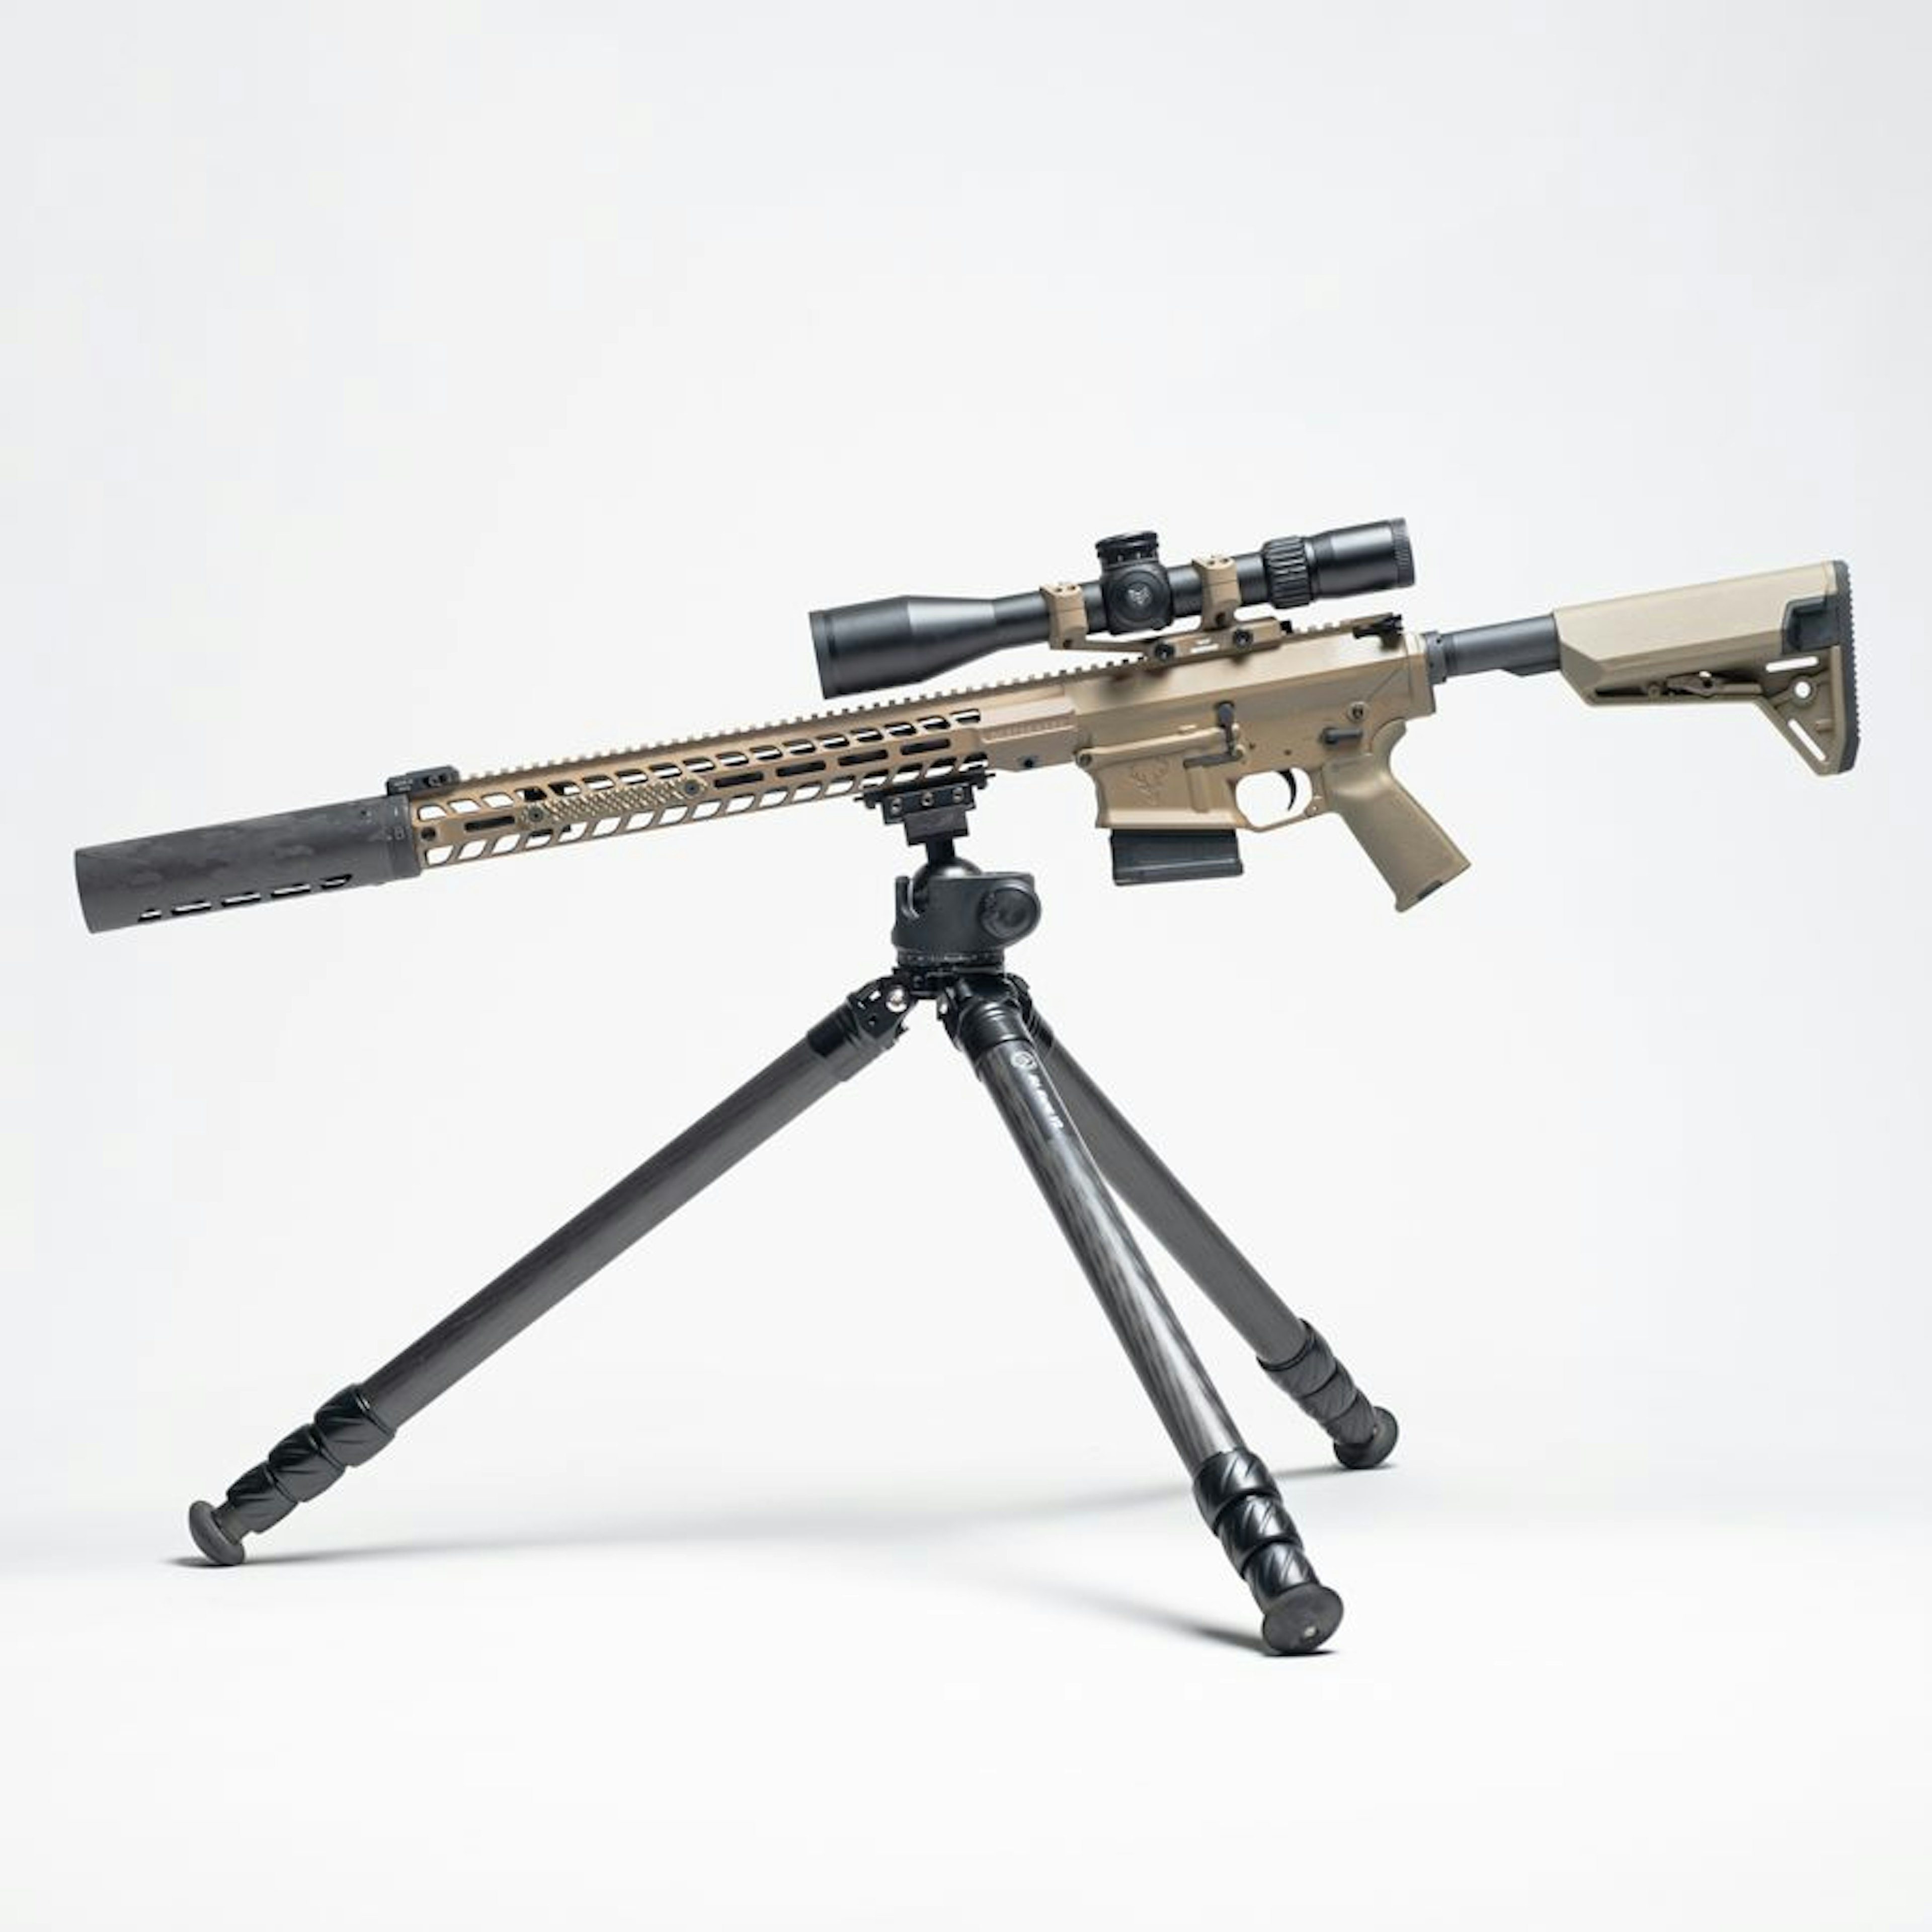 Build of the Month: Designated Marksman Stag